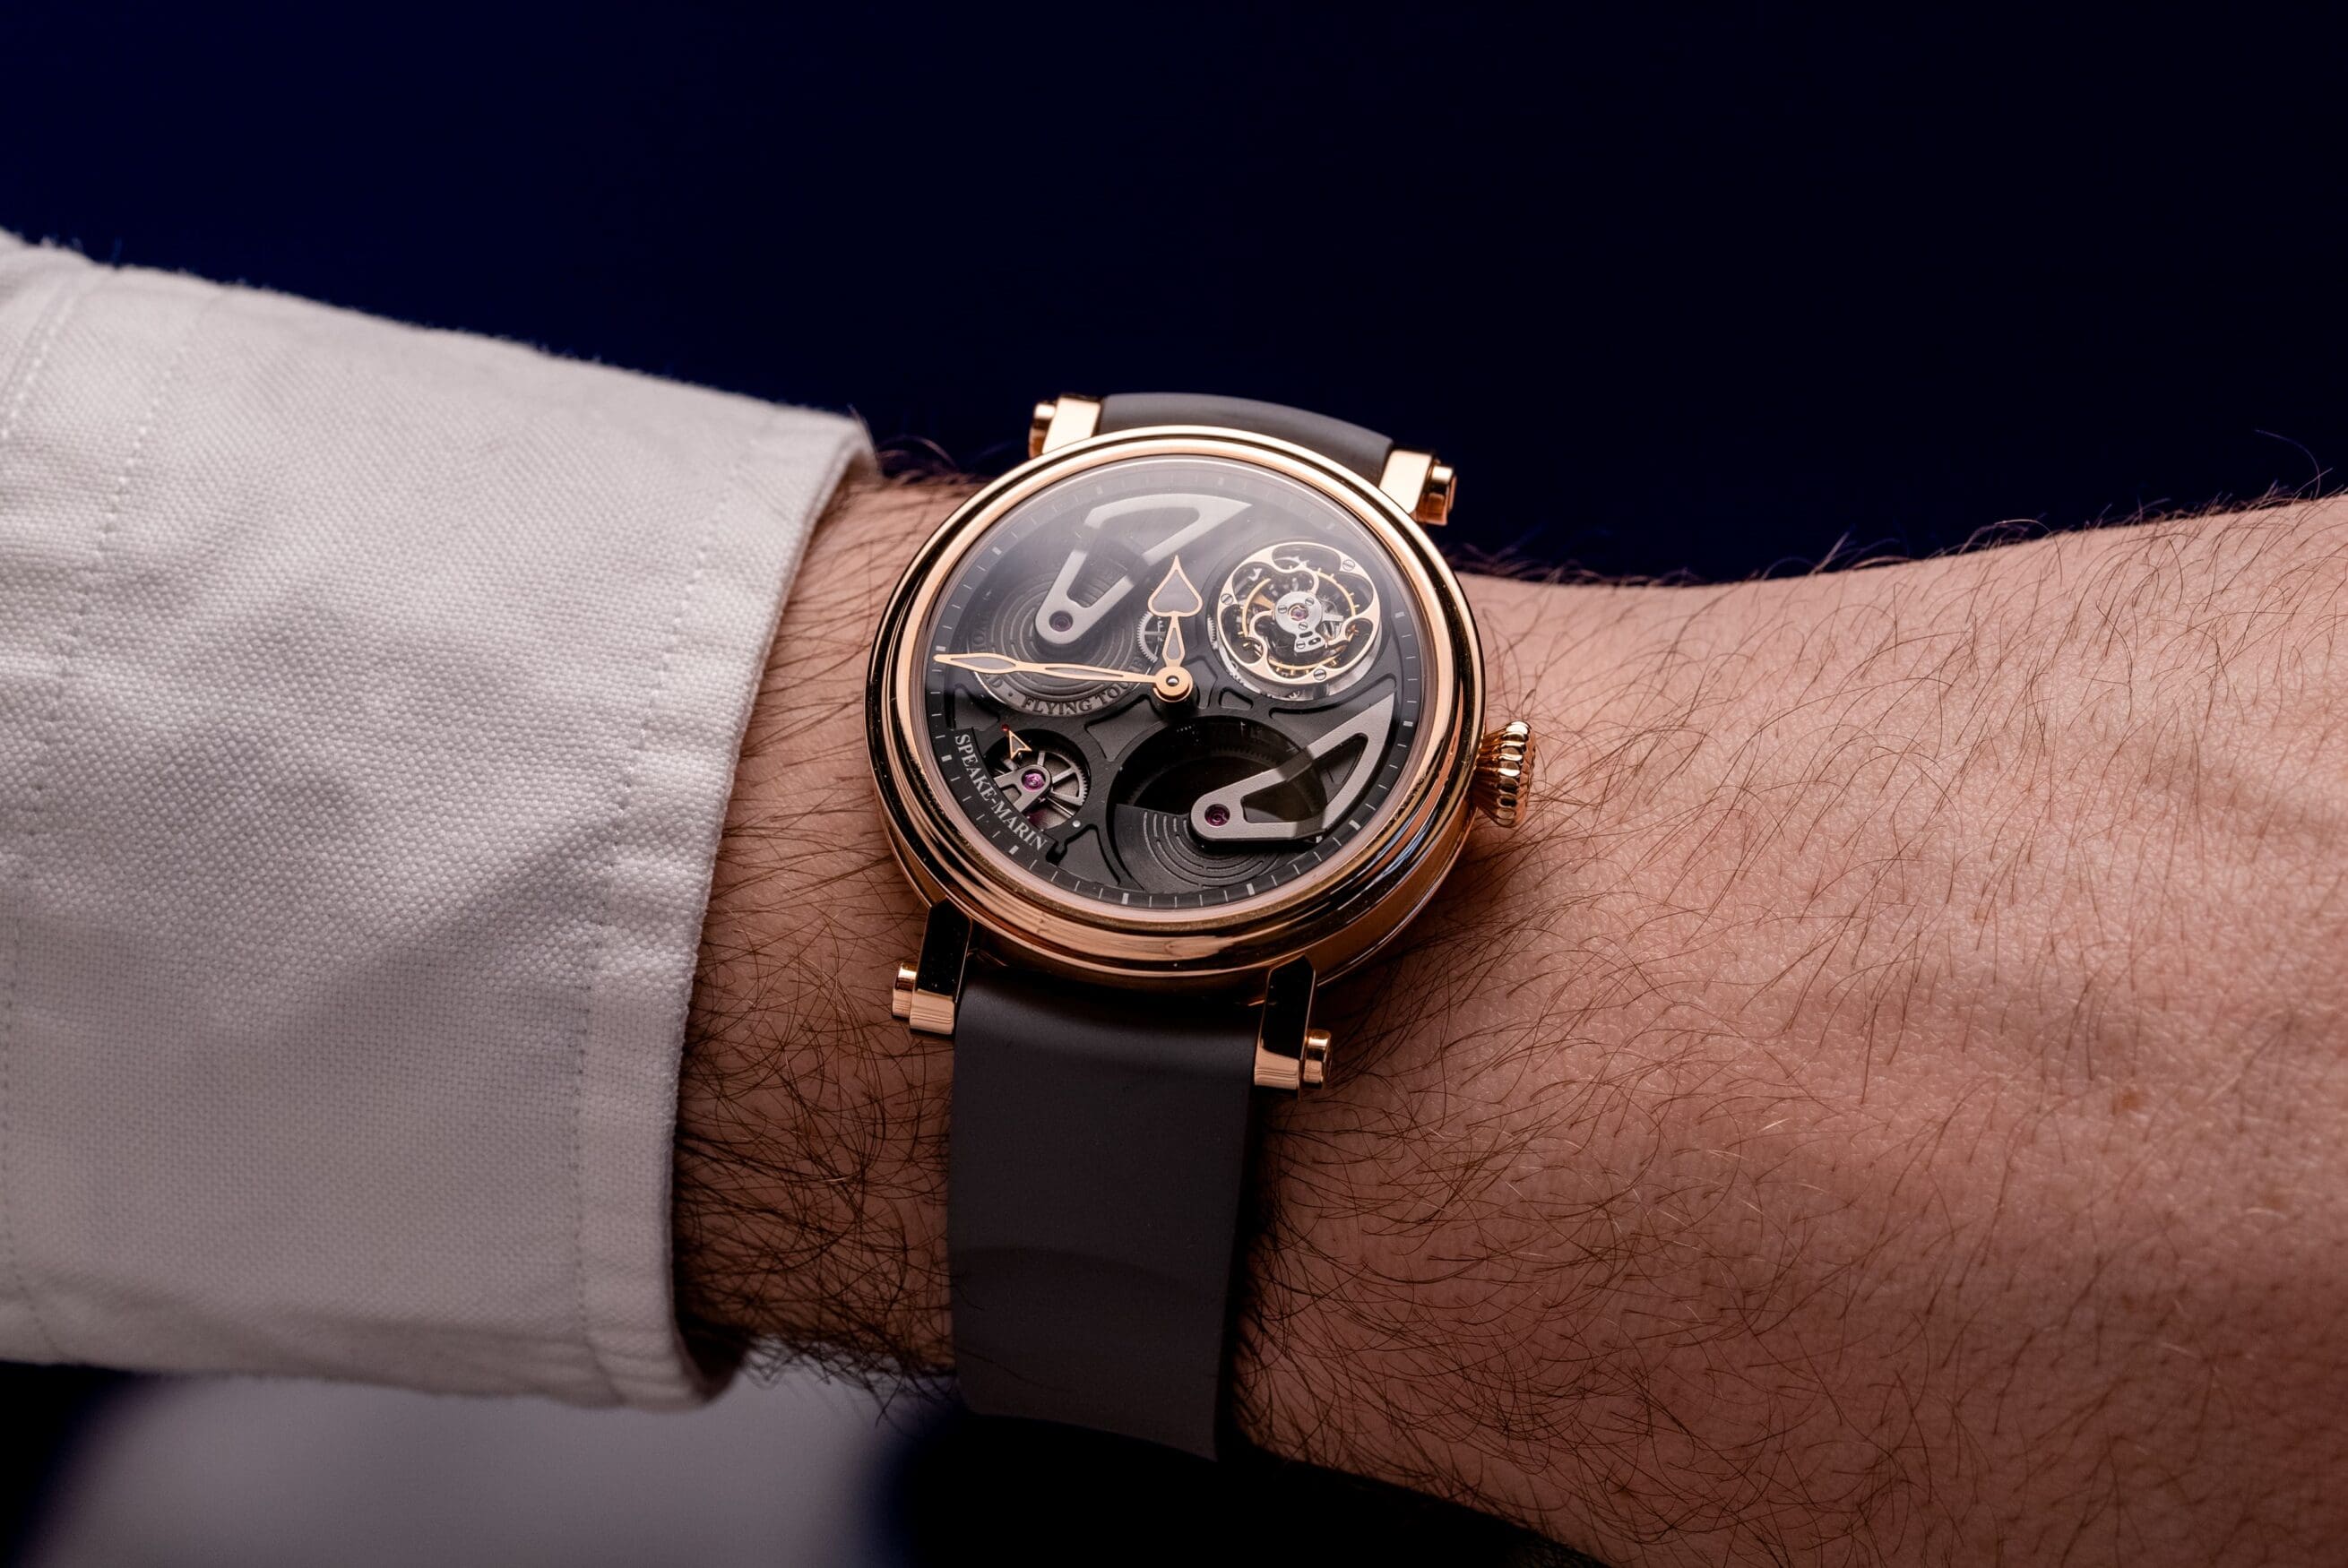 VIDEO: The Speake-Marin One & Two Openworked Tourbillons